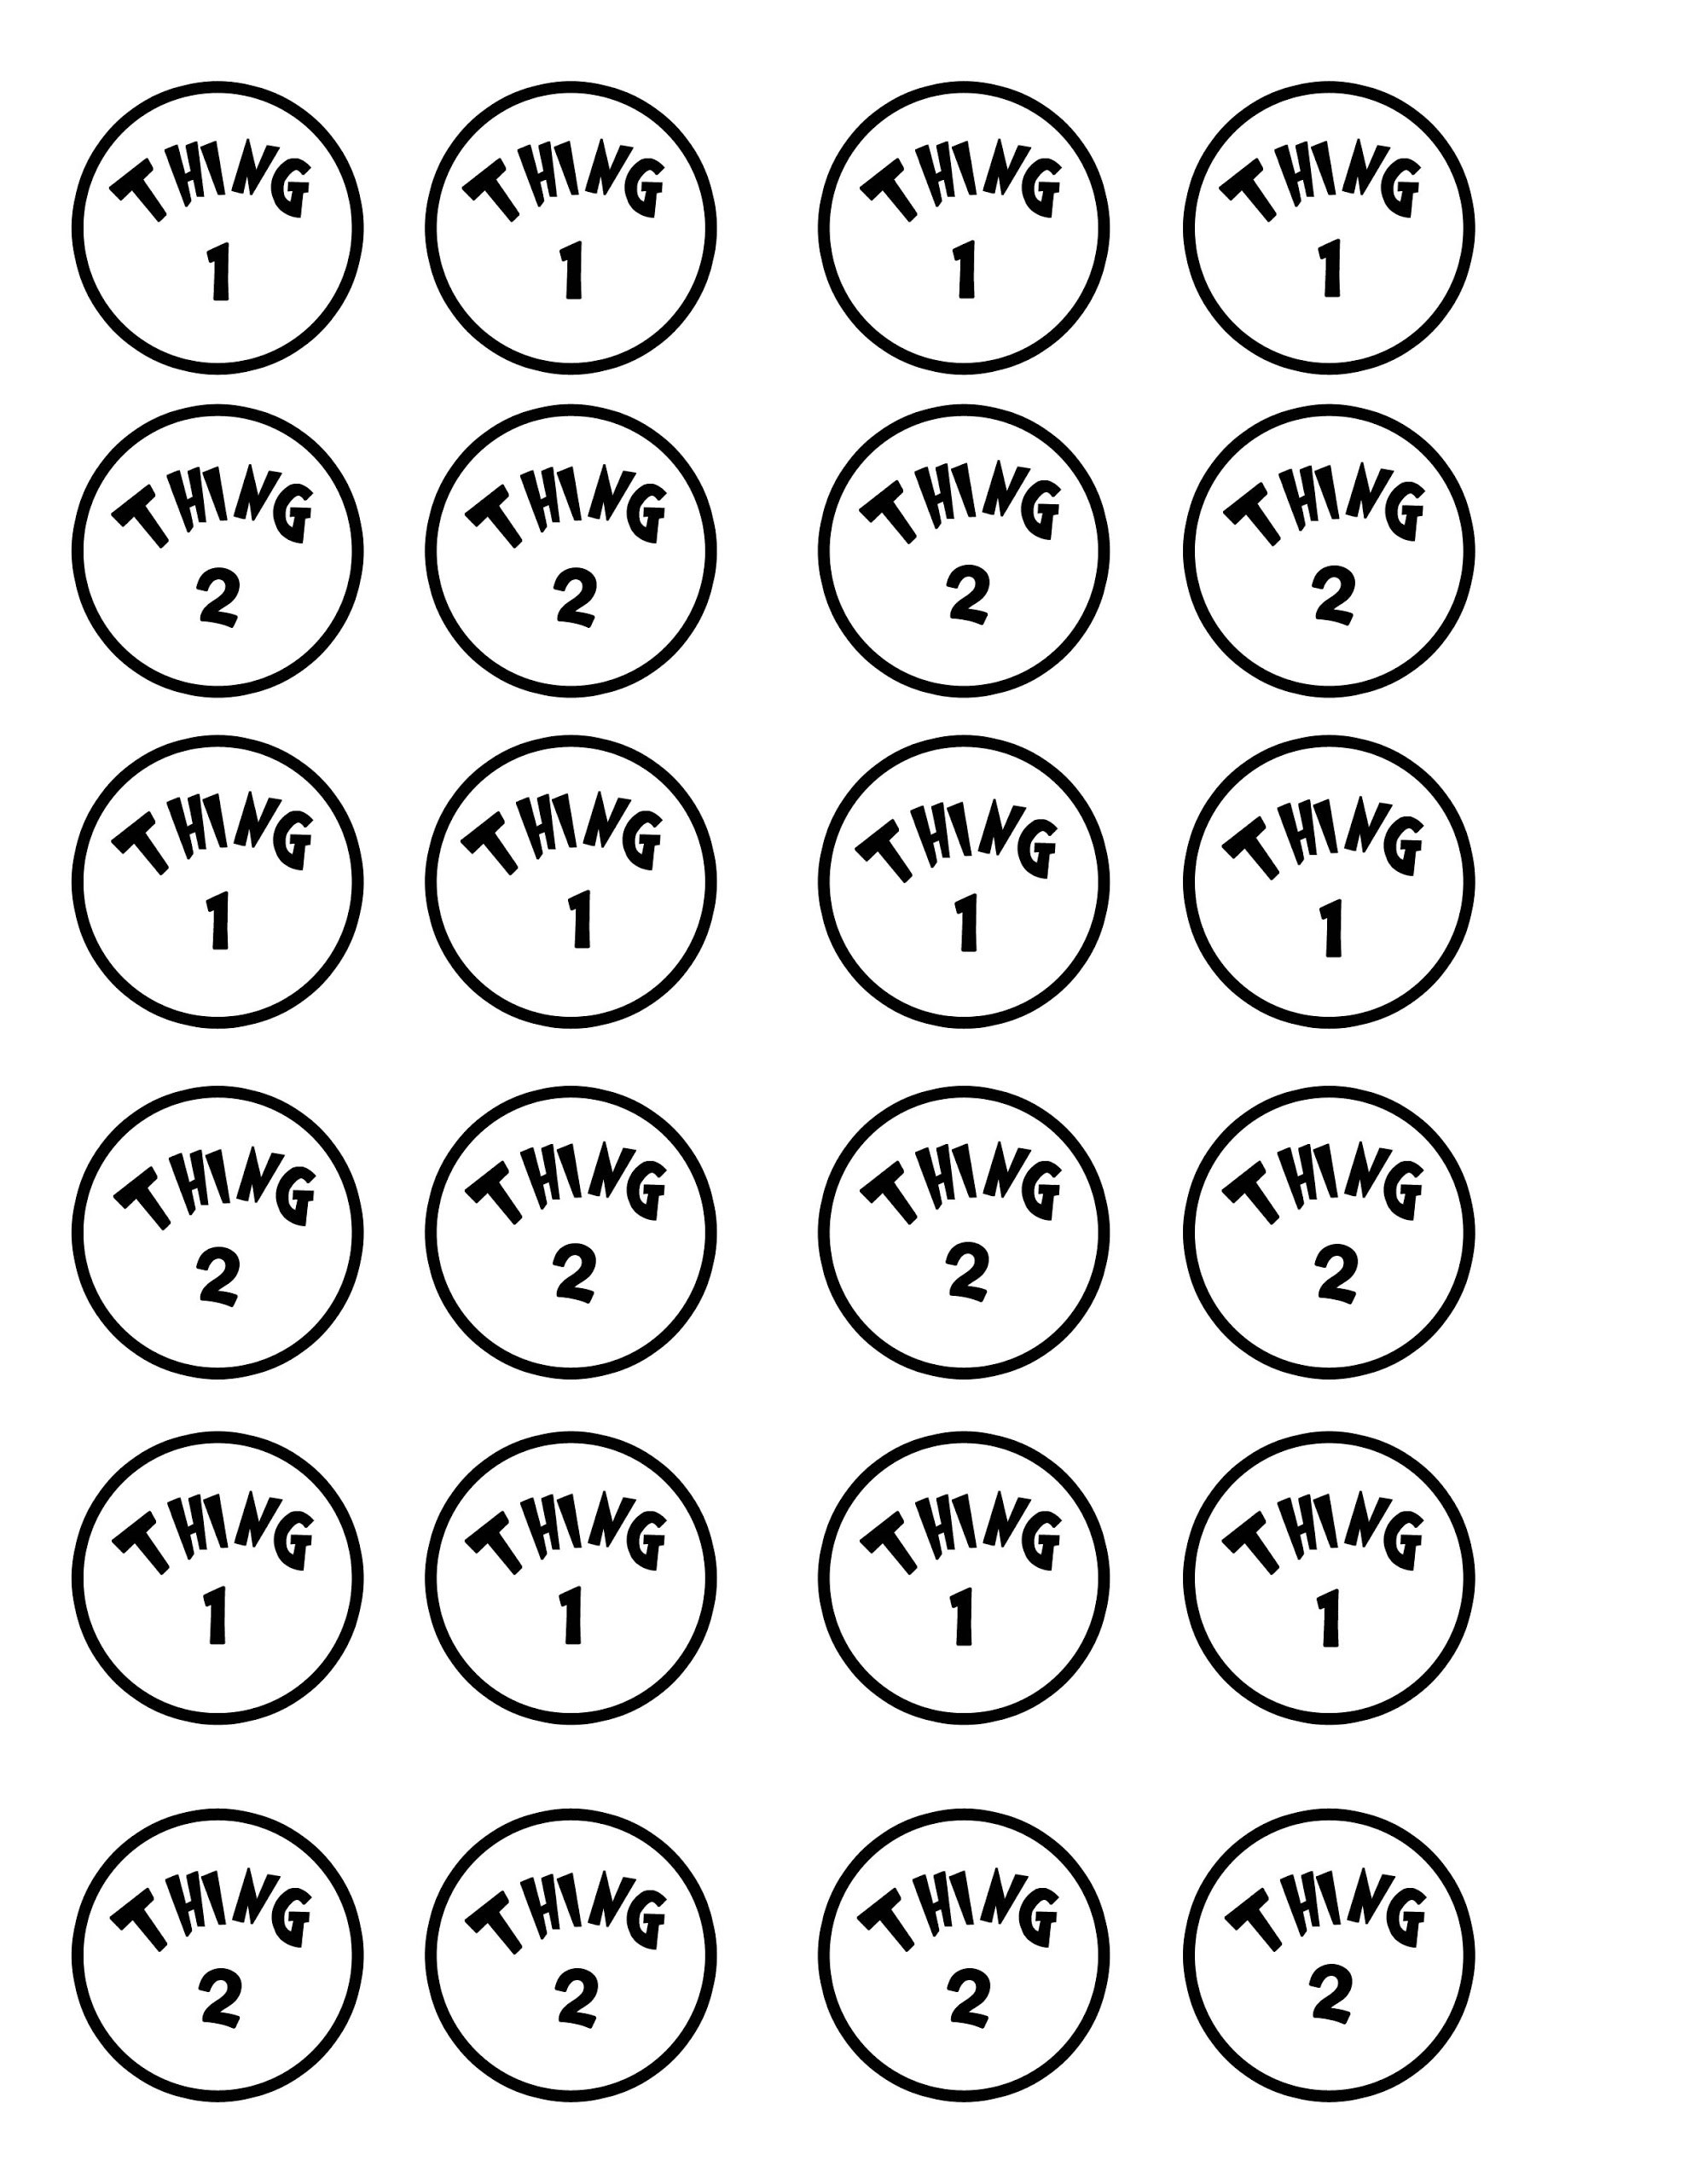 free-thing-1-and-thing-2-coloring-pages-free-download-free-thing-1-and